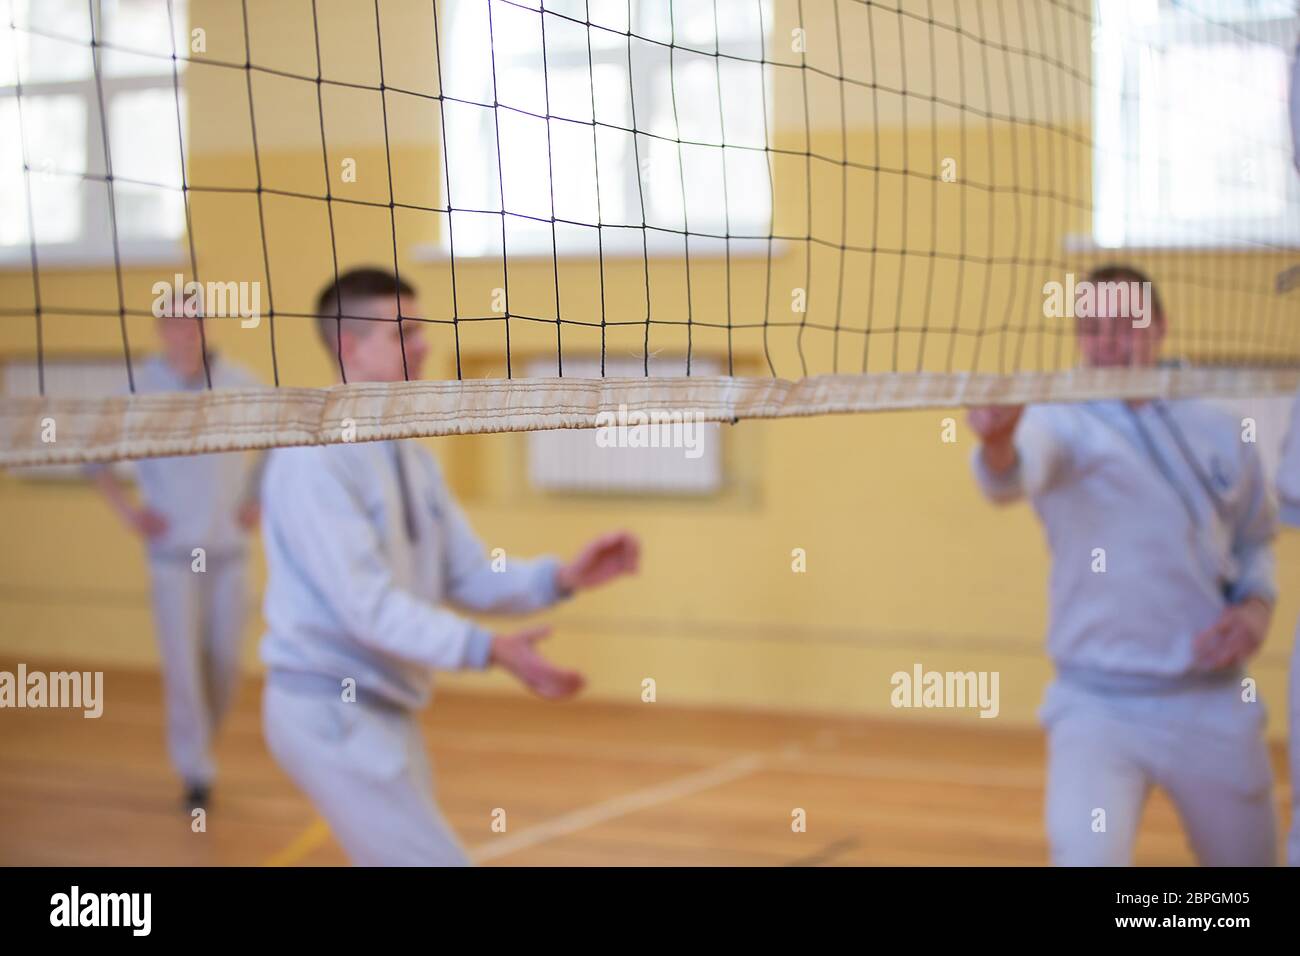 Volleyball net on the background of blurry players Stock Photo